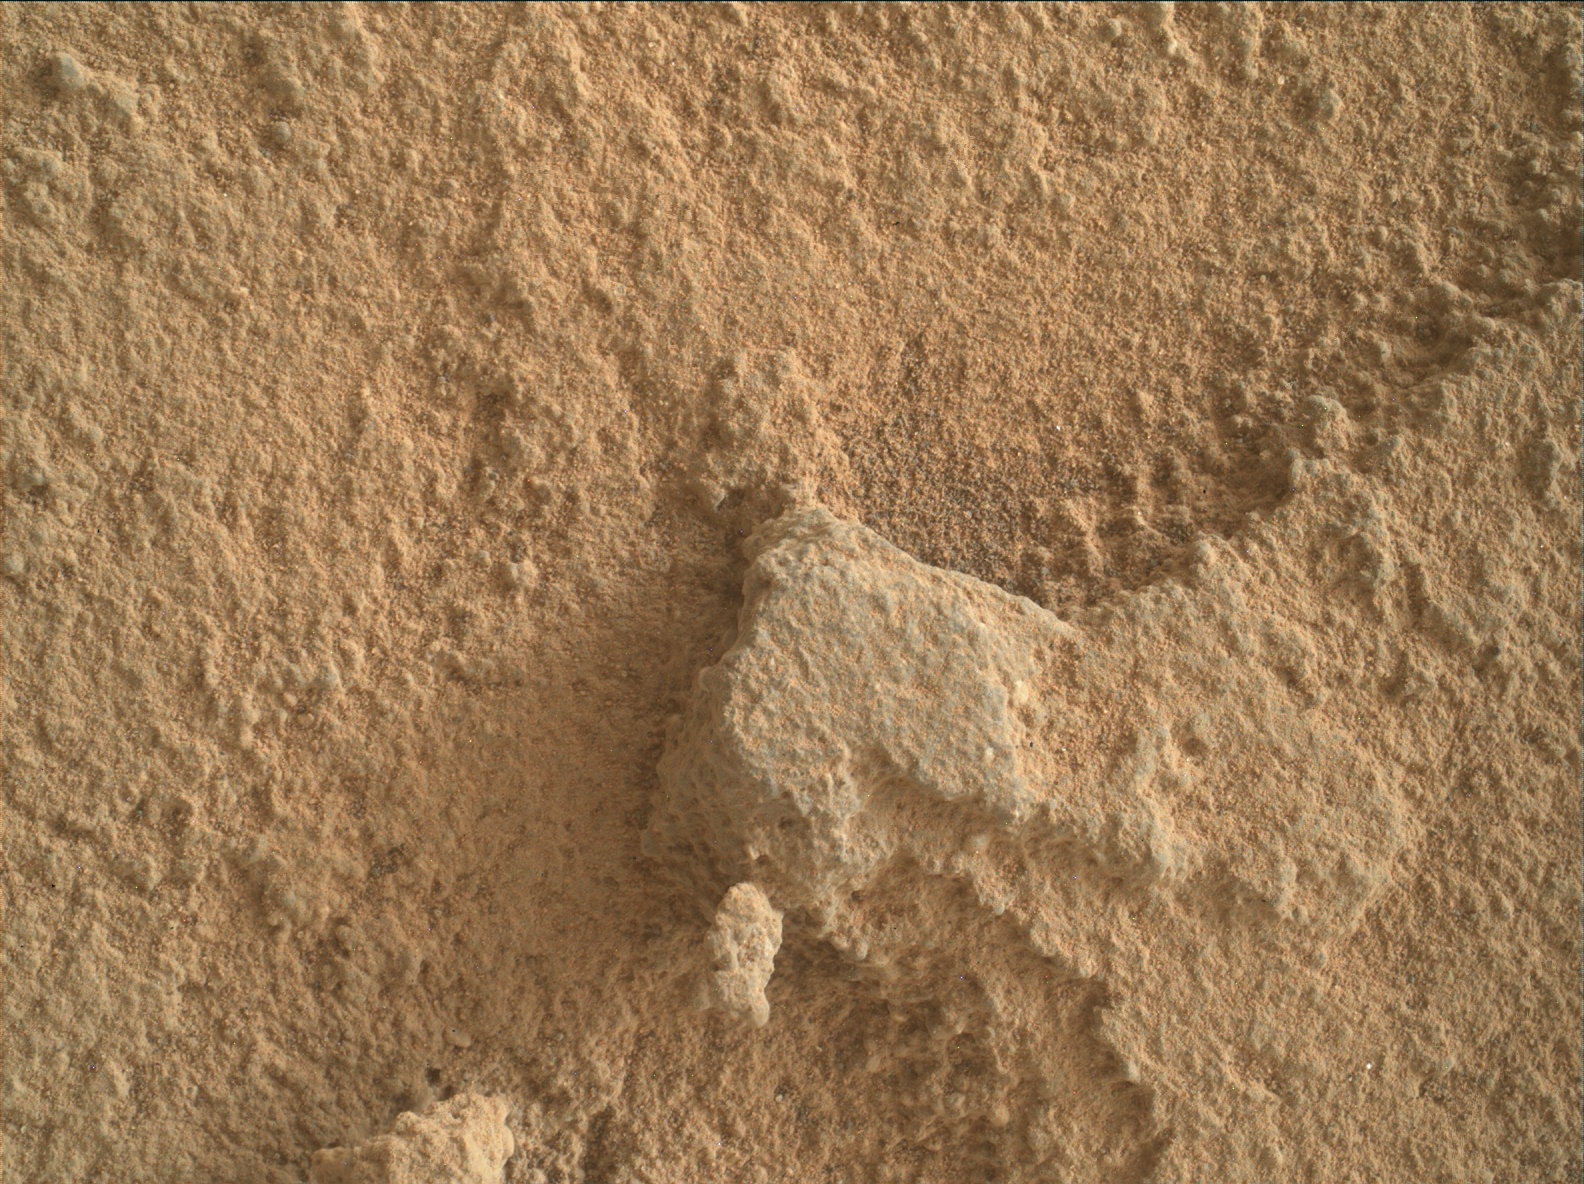 Nasa's Mars rover Curiosity acquired this image using its Mars Hand Lens Imager (MAHLI) on Sol 2736